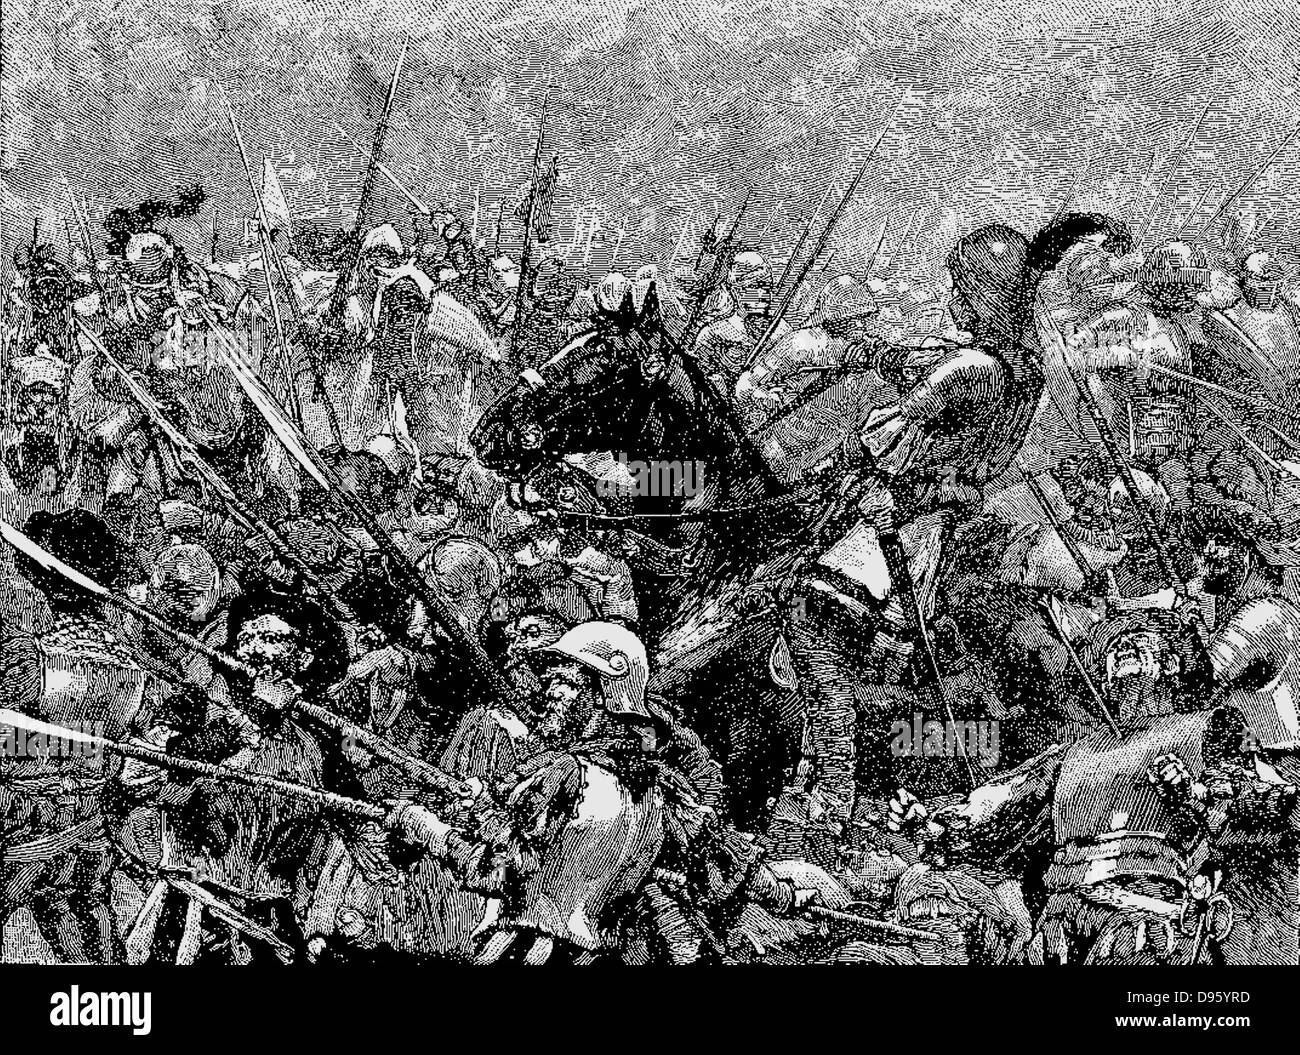 Battle of Stoke, 16 June 1487. German mercenaries under Martin Schwarz making their last stand against the stronger and more disciplined forces of the king. English longbows with steel-tipped arrows outshot crossbows of the Germans which took far longer to load. Engraving c1885. Stock Photo